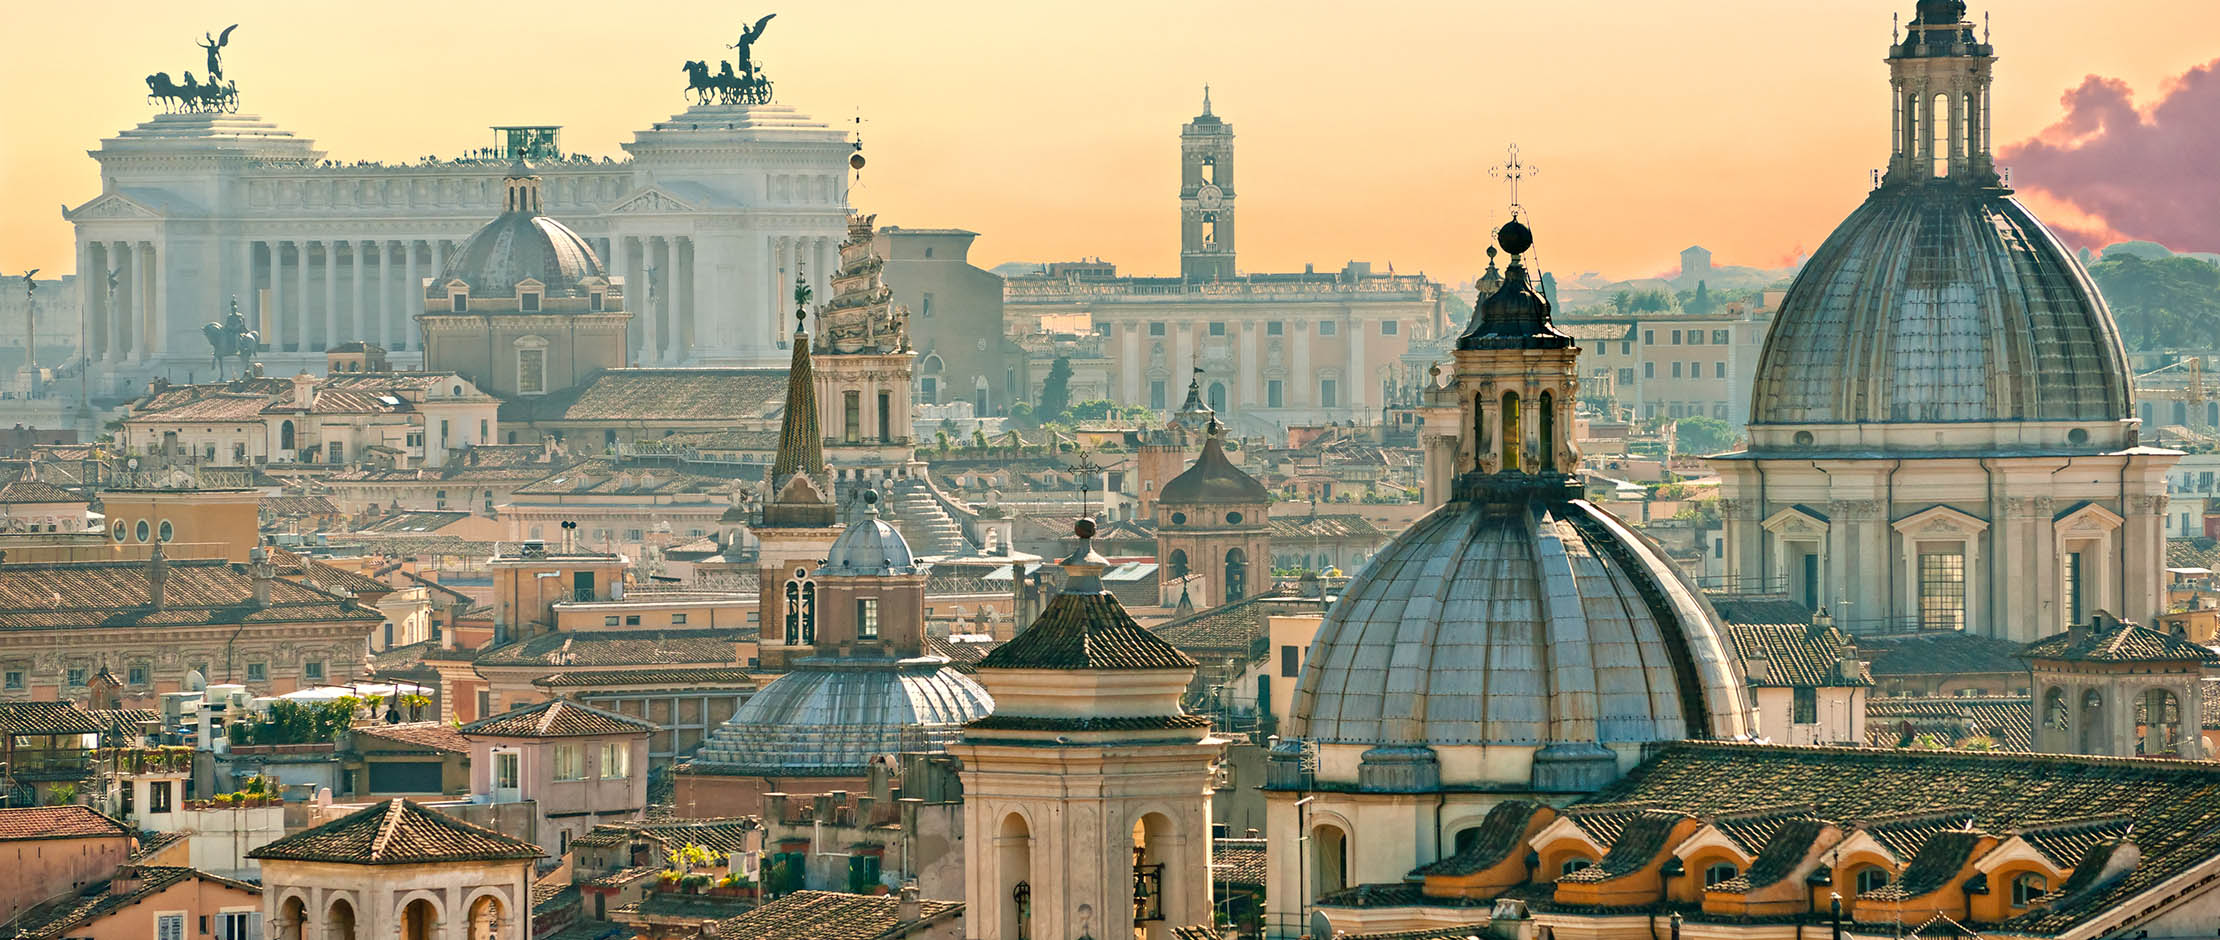 Book your <strong>Skip the Line Vatican tickets</strong> and <strong>Colosseum tickets</strong> here. See the Vatican & Sistine Chapel or the Colosseum, Roman Forum and Palatine hill at your own pace and chosen time with our <strong>Rome tickets</strong>.